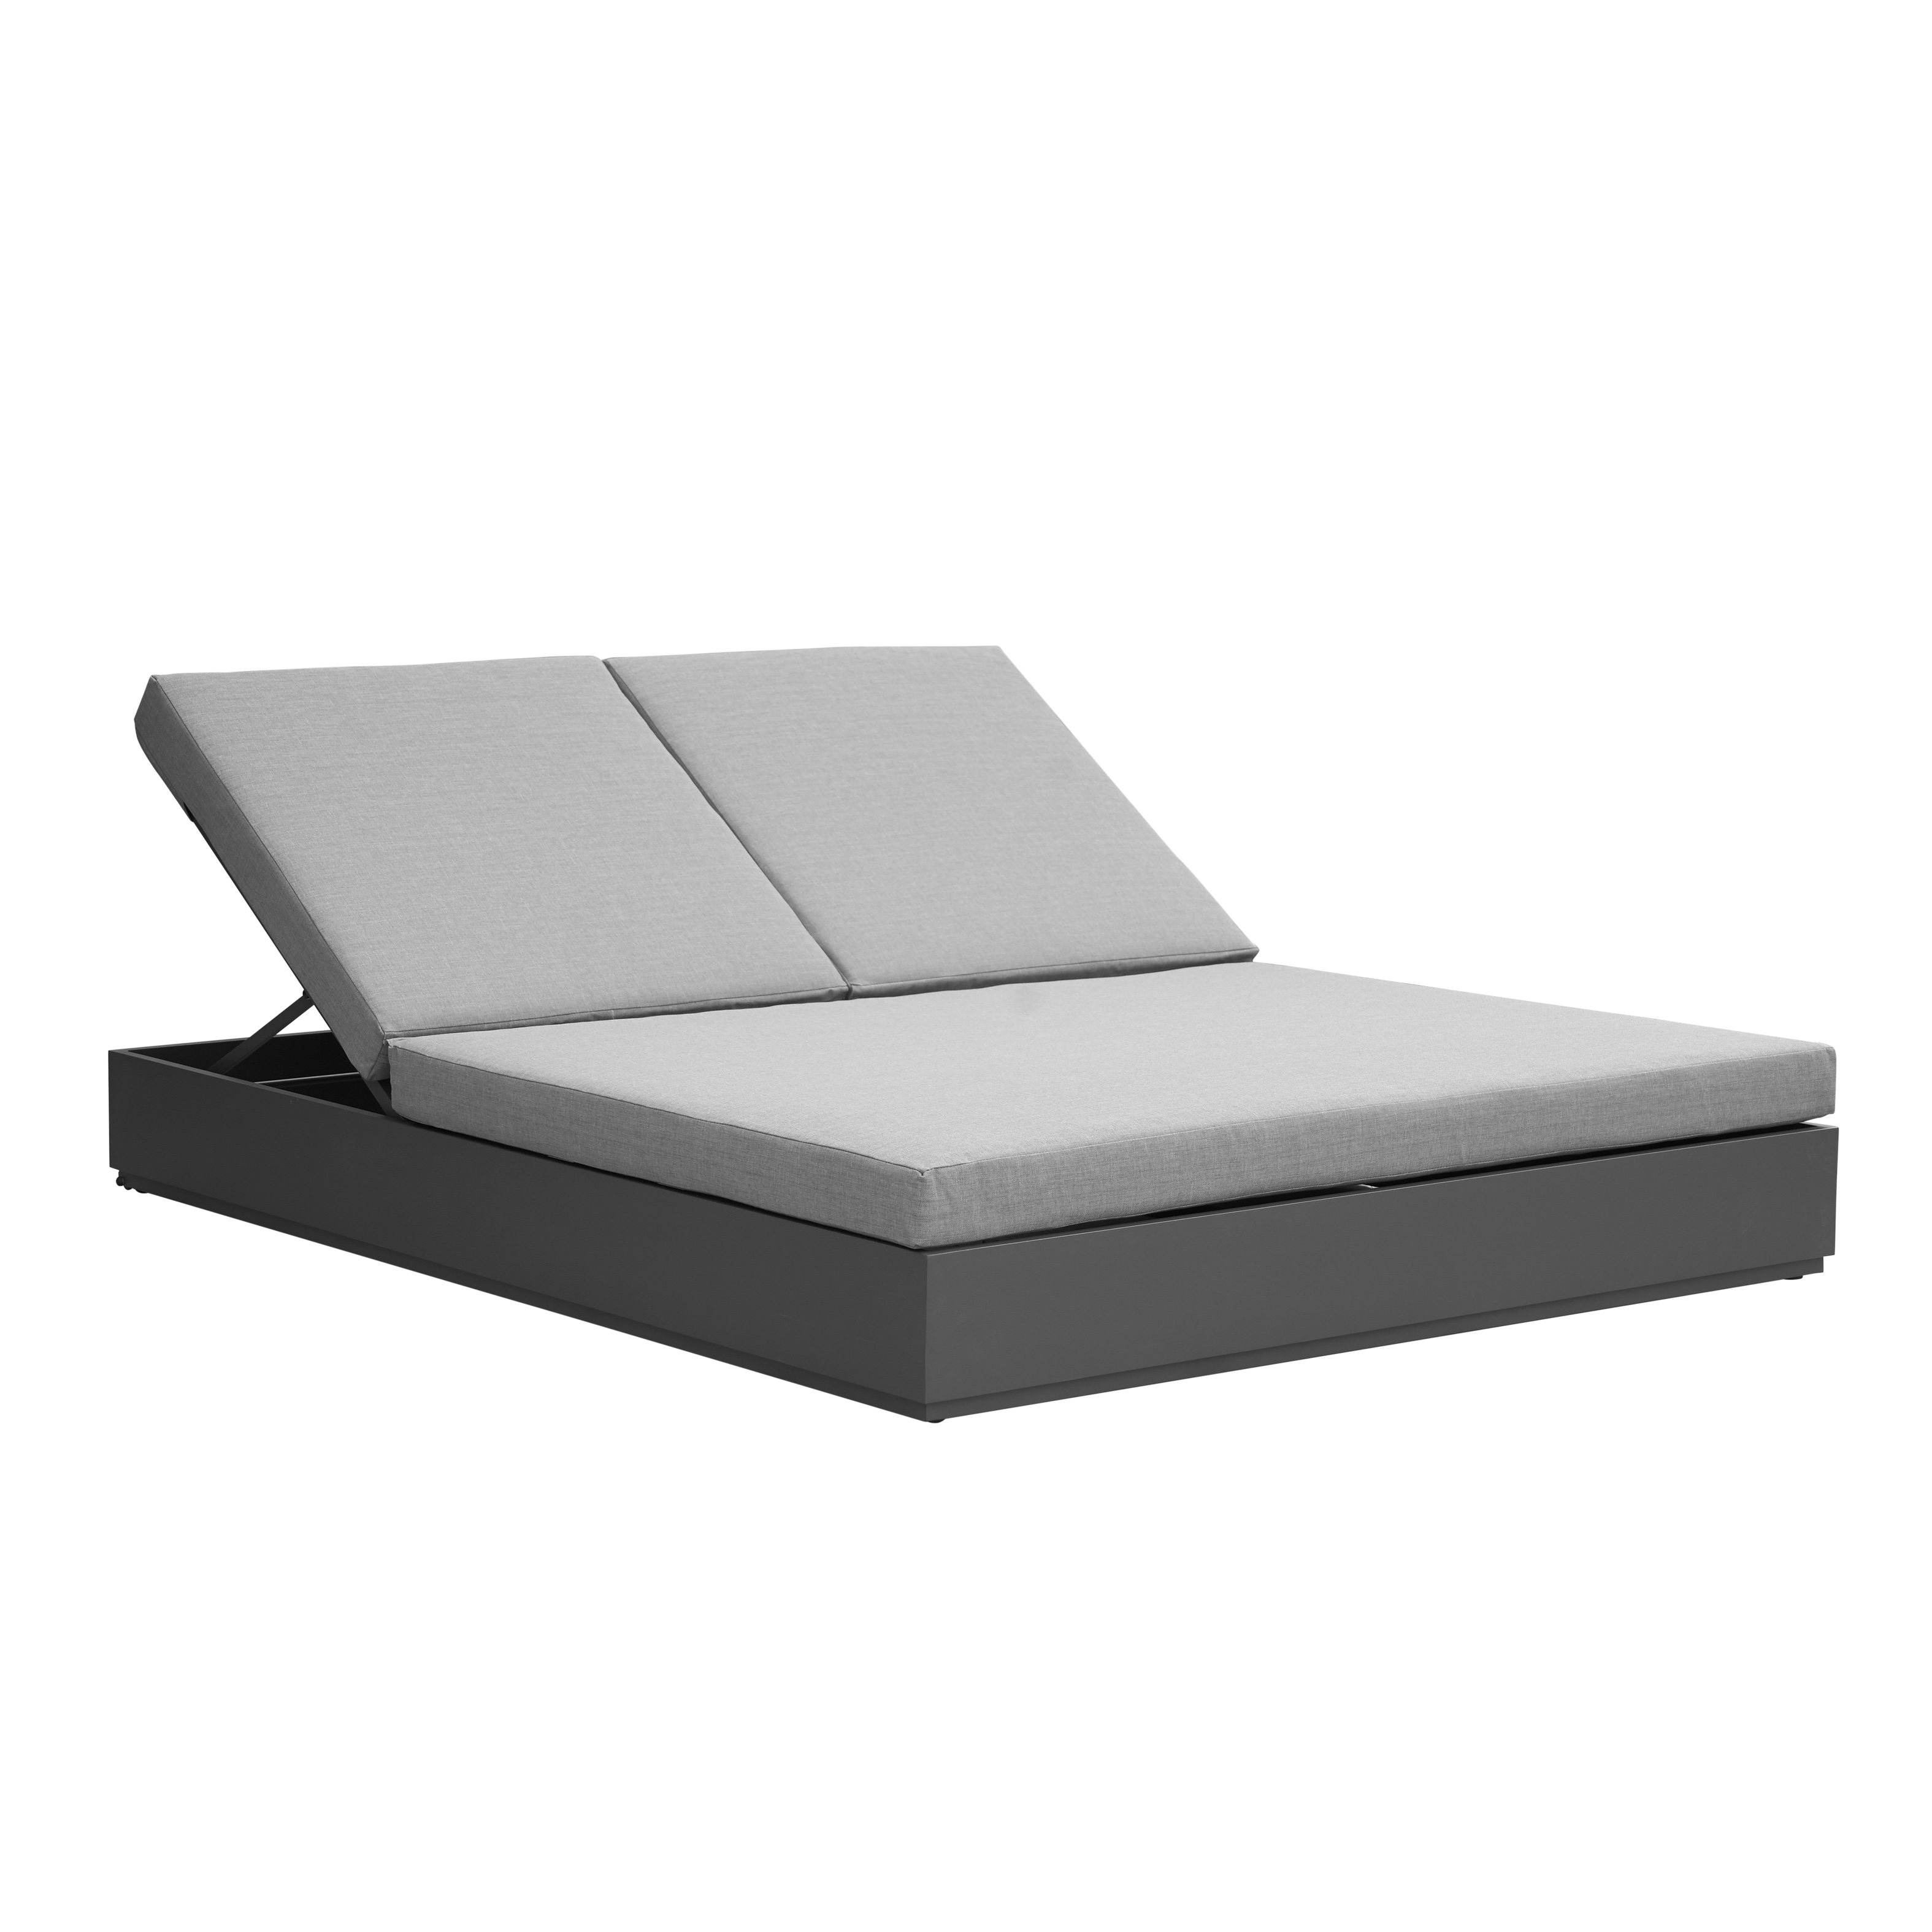 China wholesale Aluminum Beach Chair Suppliers –  Raja double daybed – TAILONG